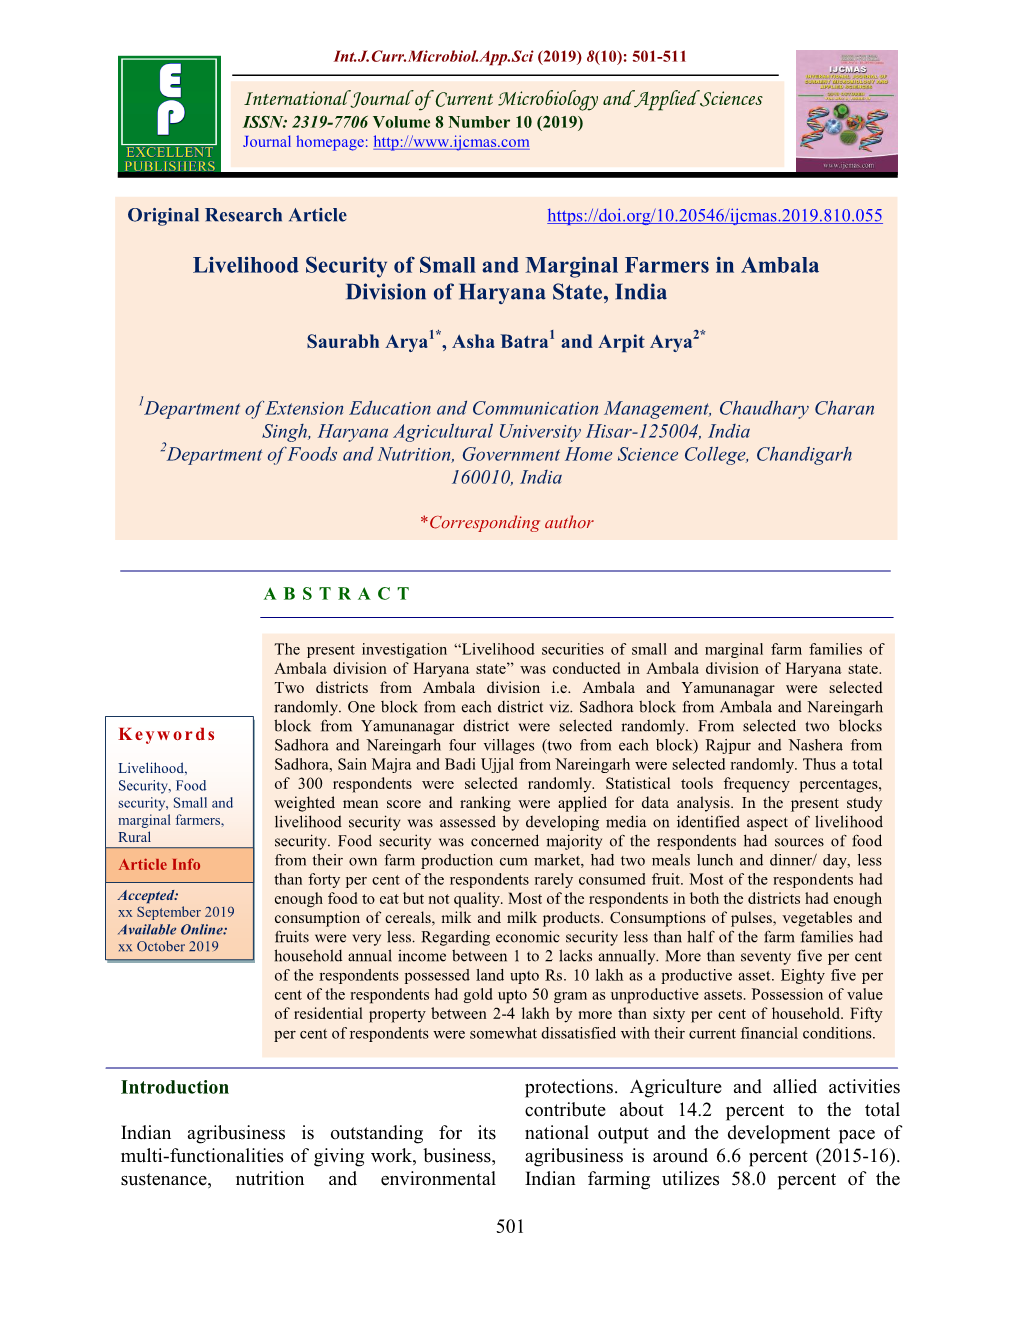 Livelihood Security of Small and Marginal Farmers in Ambala Division of Haryana State, India